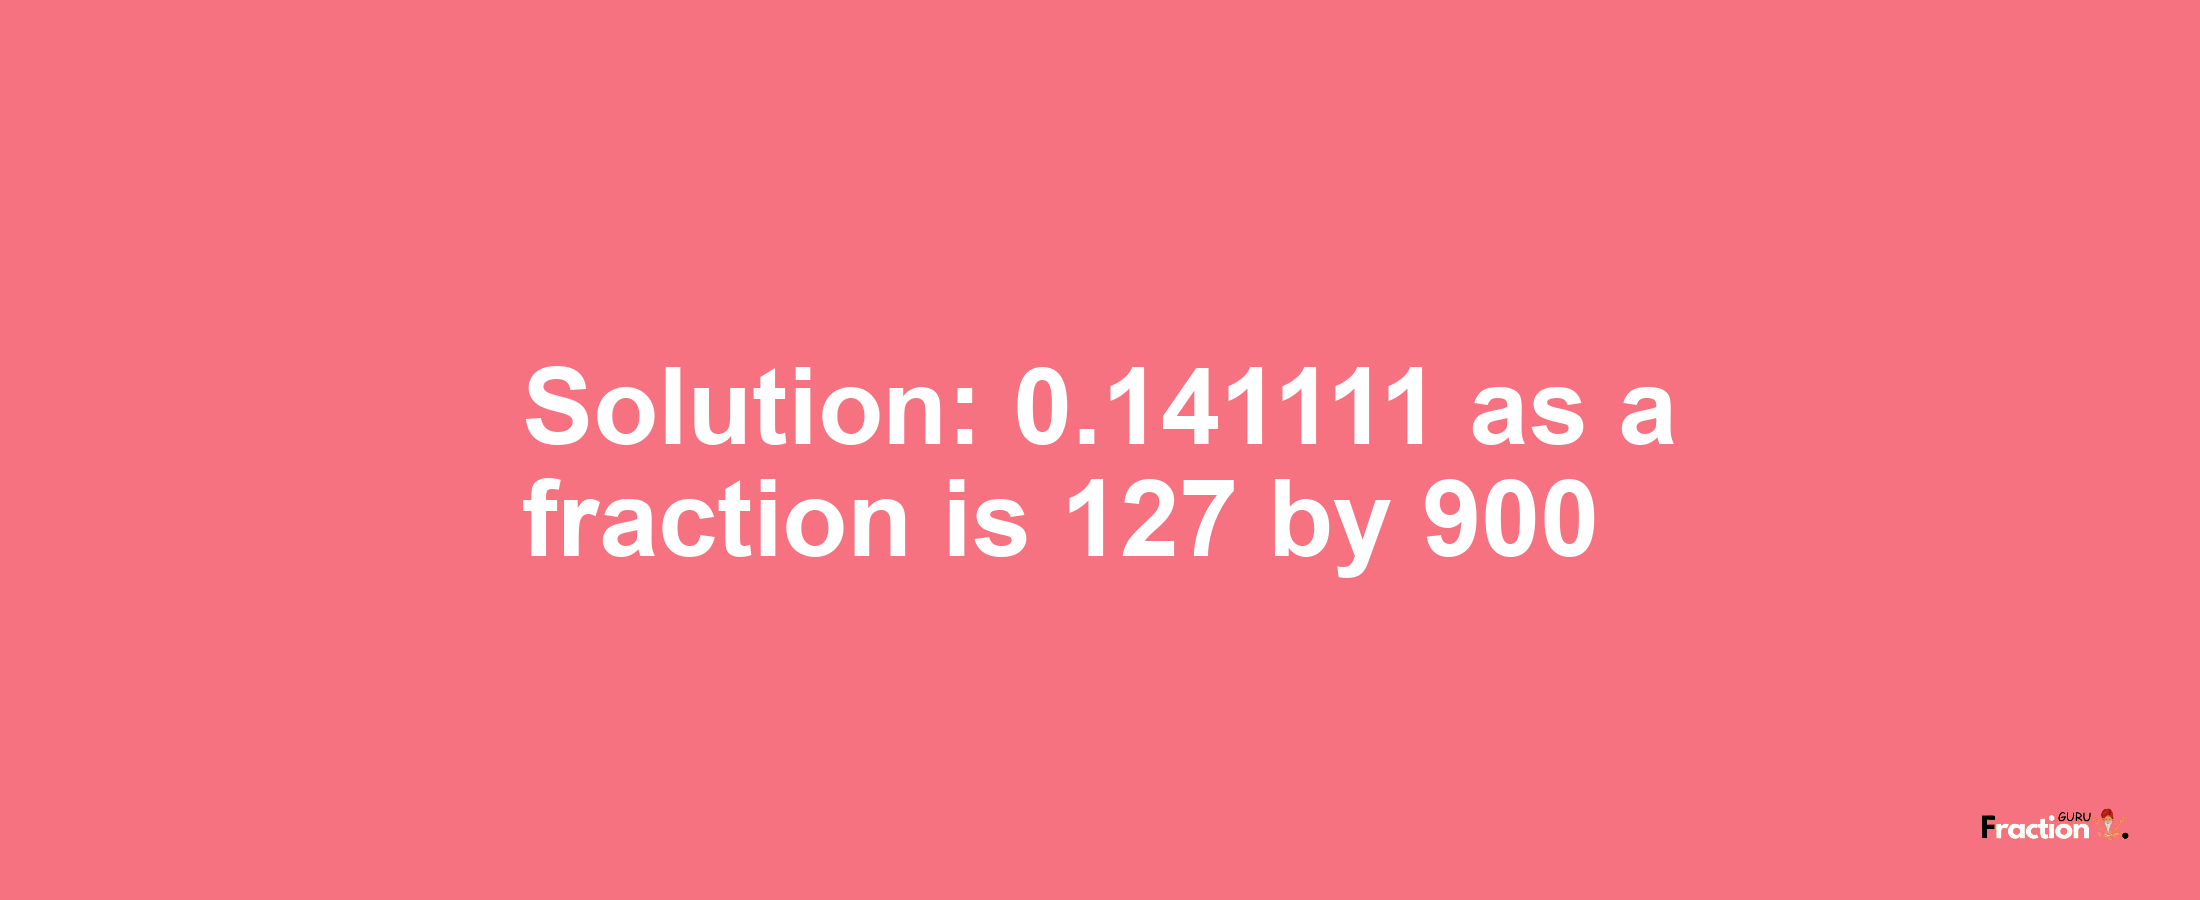 Solution:0.141111 as a fraction is 127/900